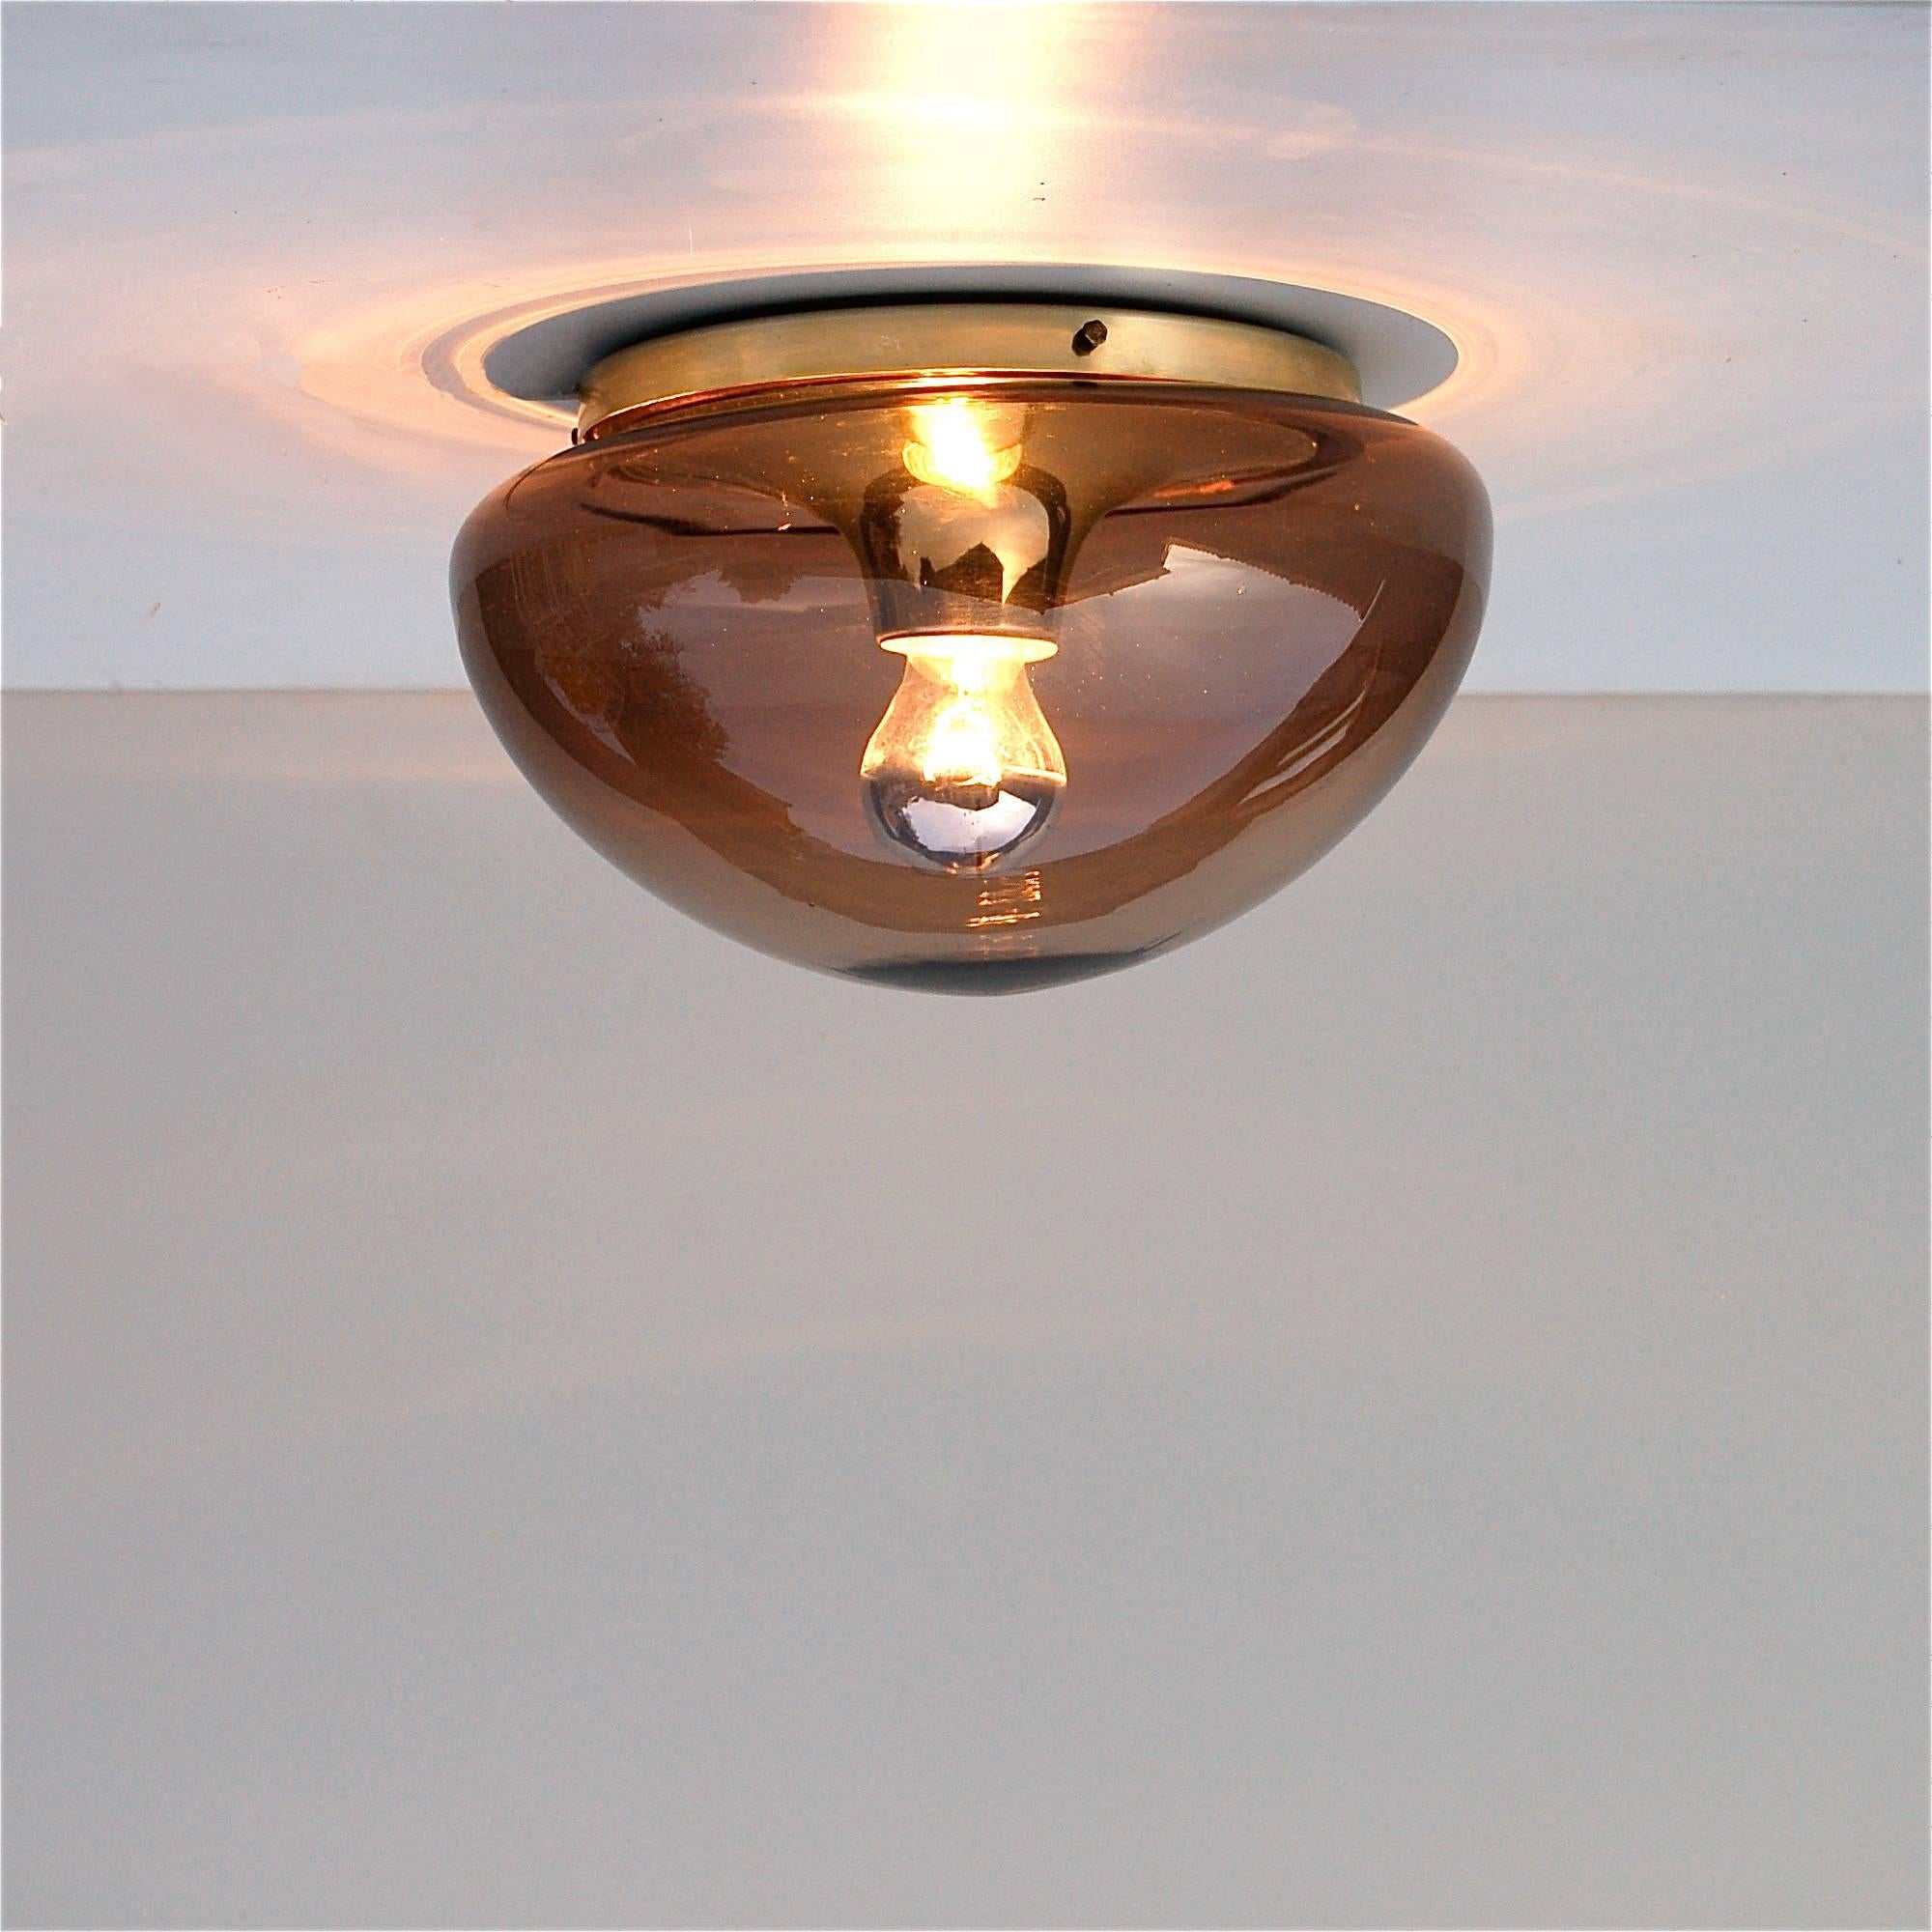 This 1970s flush mounted RAAK style lamp can be used as either a ceiling or wall light. It has a large dome shade in smoked glass with a single light source at the centre of the aluminium base. The light requires a single E27 lightbulb and is in